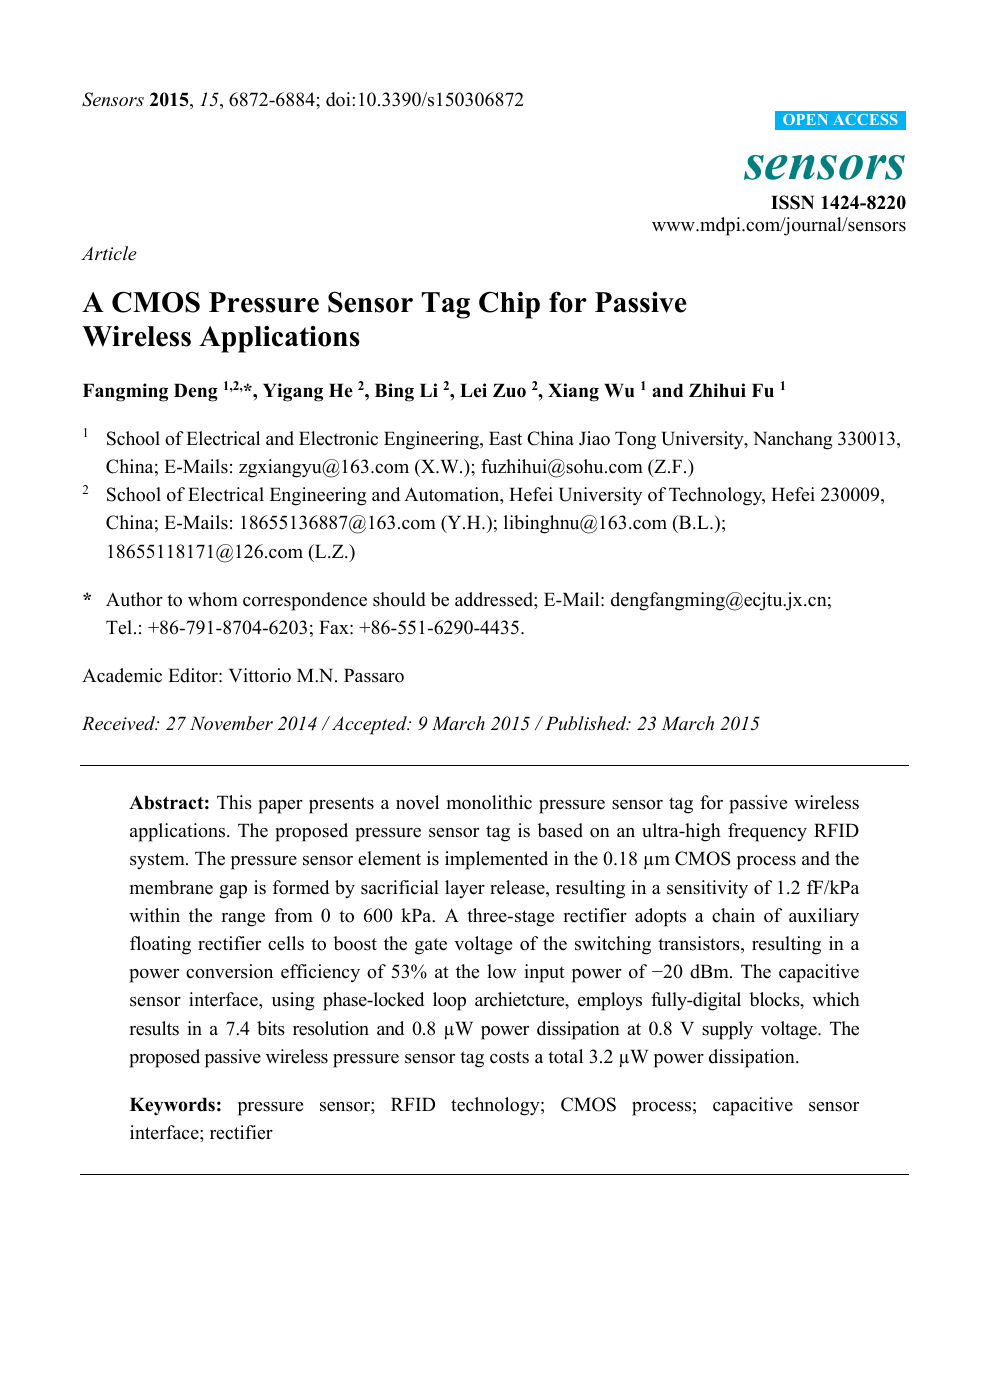 A Cmos Pressure Sensor Chip For Passive Wireless Applications Topic Of Research Paper In Electrical Engineering Electronic Engineering Information Engineering Download Scholarly Article Pdf And Read For Free On Cyberleninka